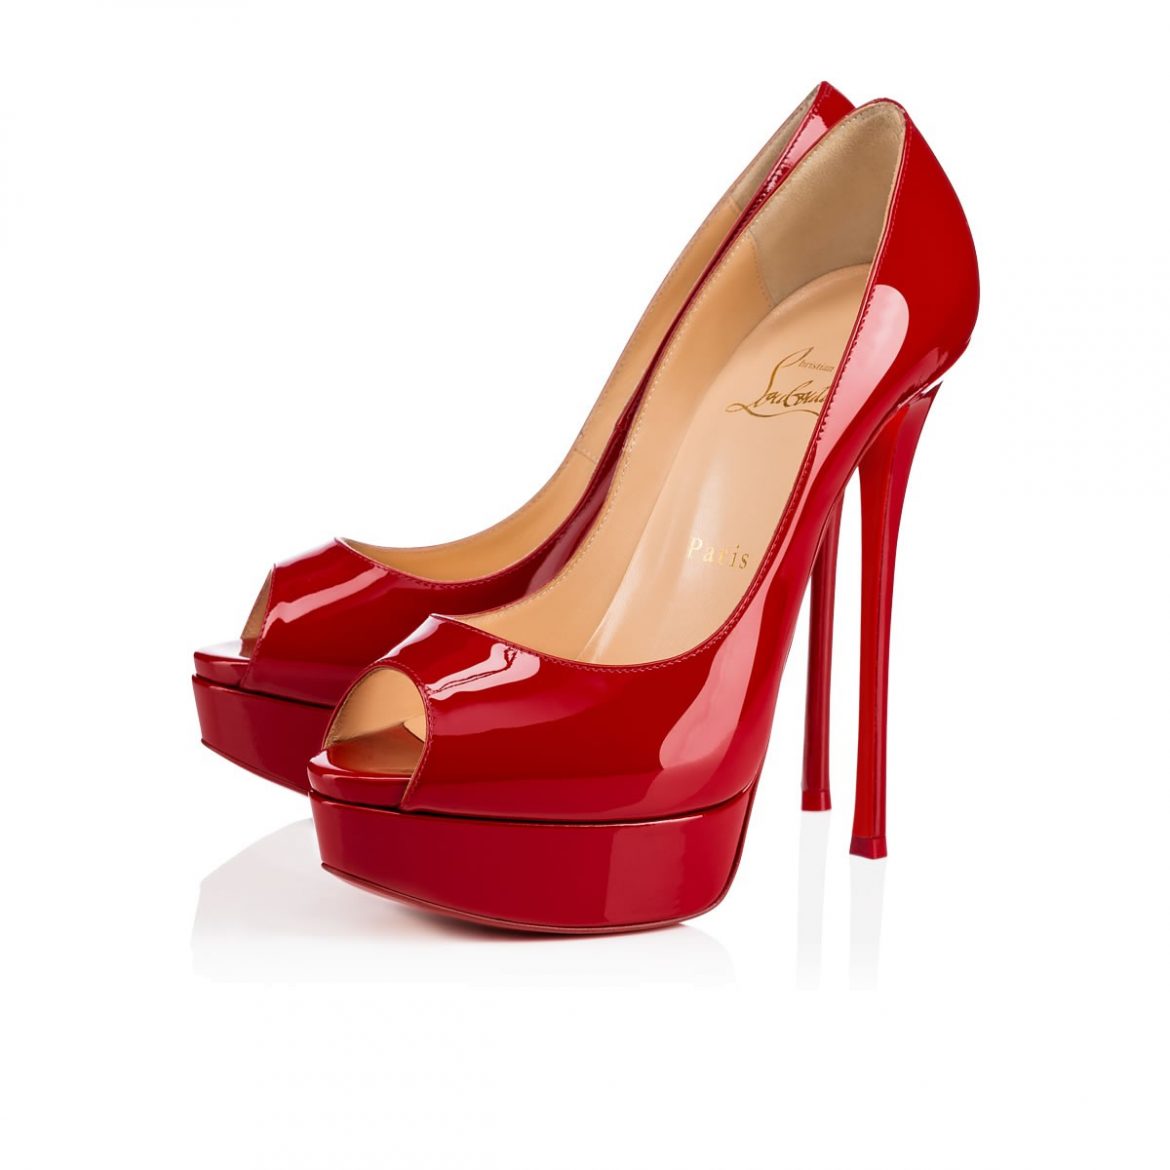 Christian Louboutin Fetish Heels Collection - cars & life